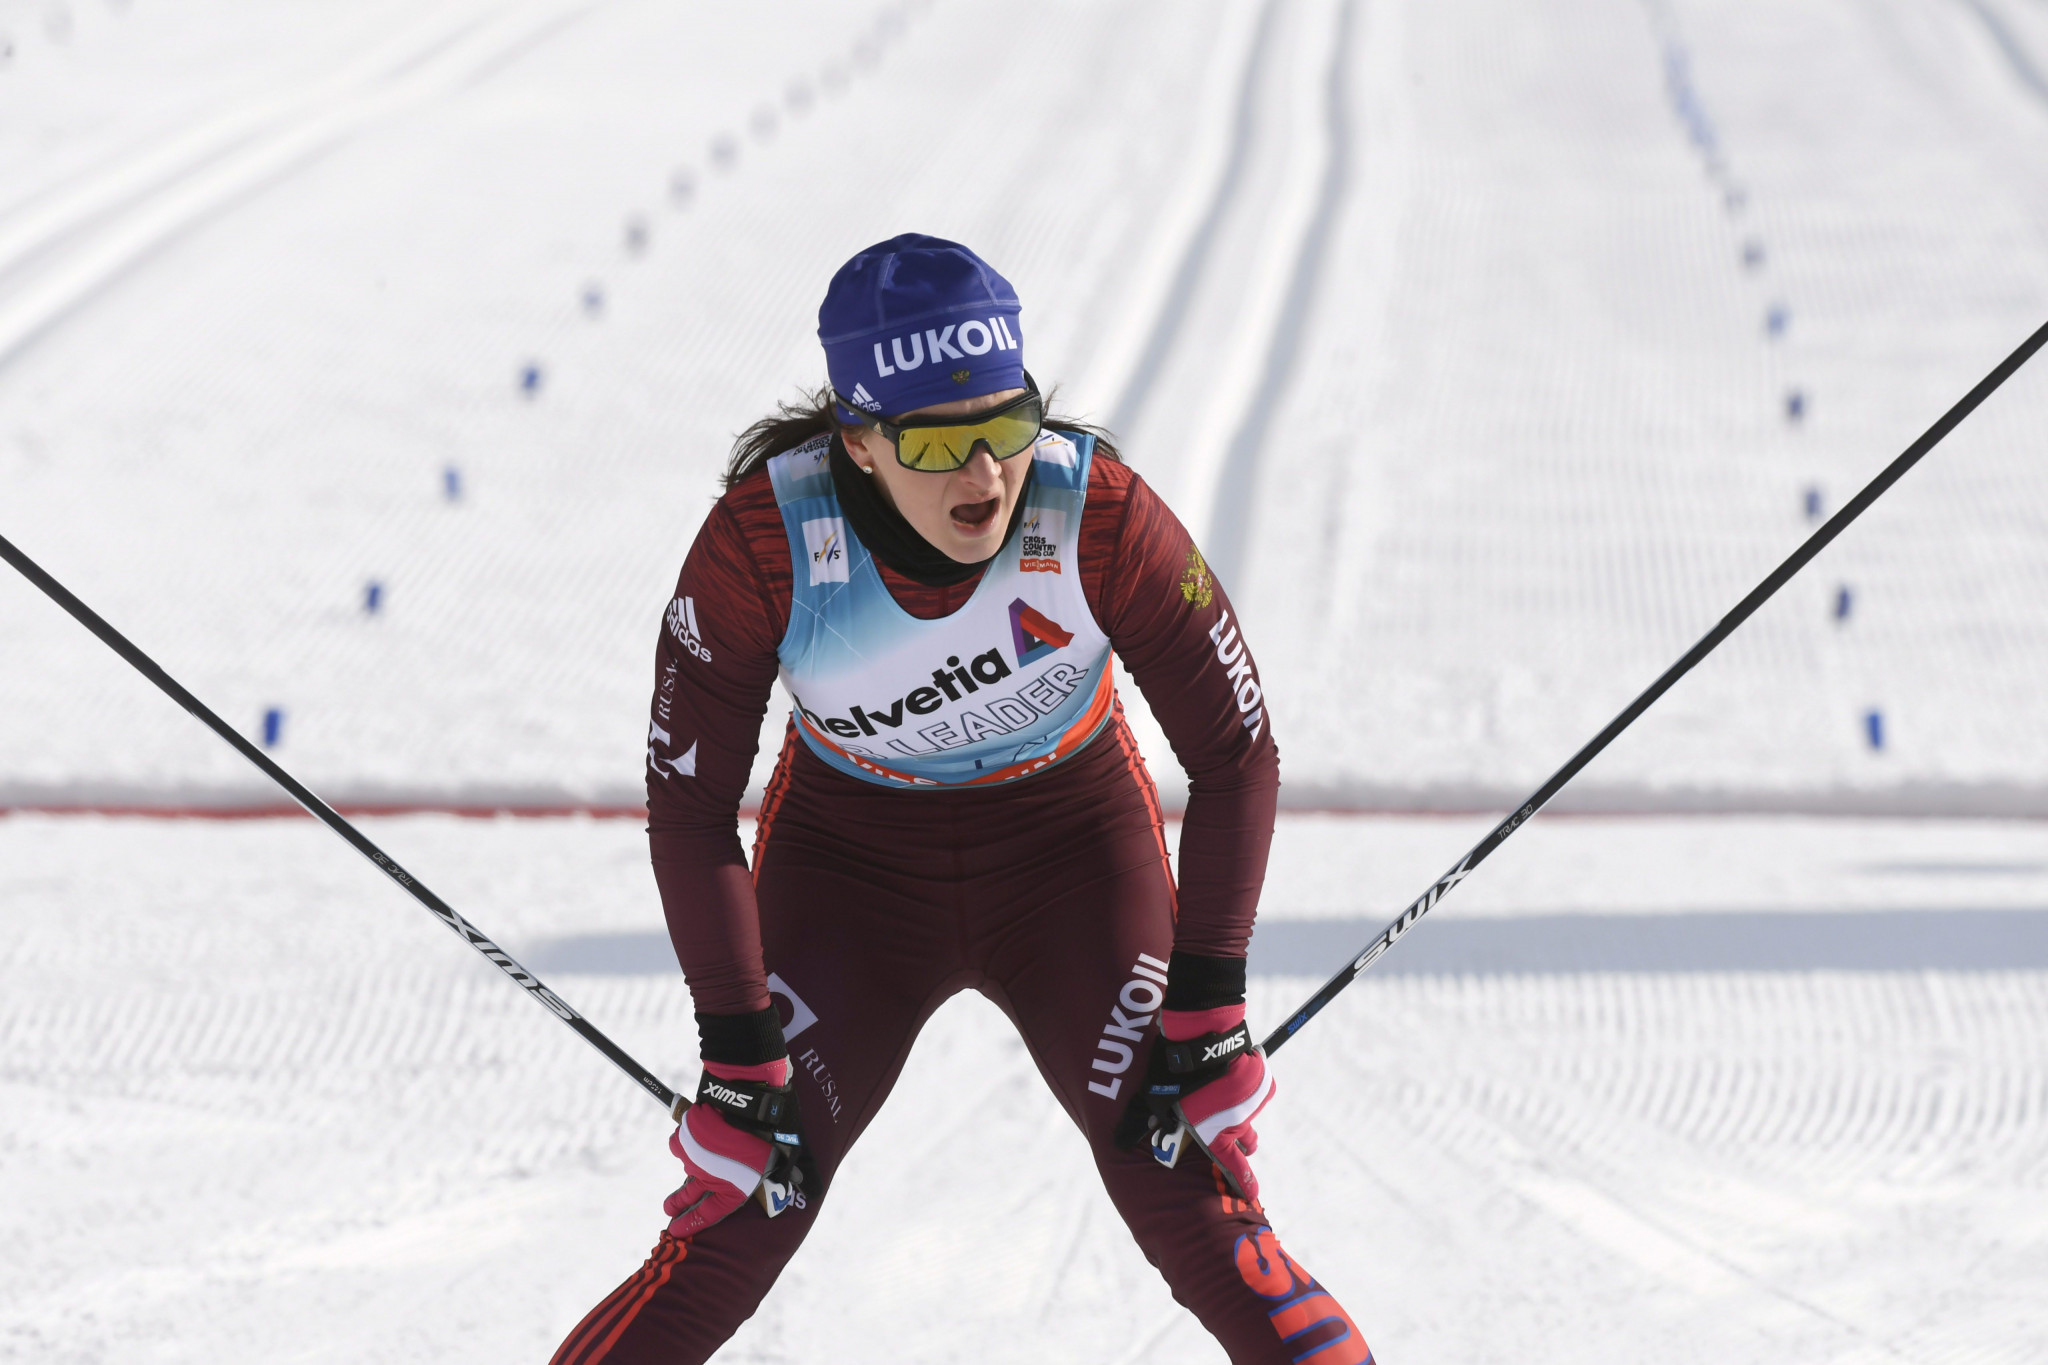 Nepryaeva gets career first FIS Cross-Country World Cup victory in second stage of Tour de Ski